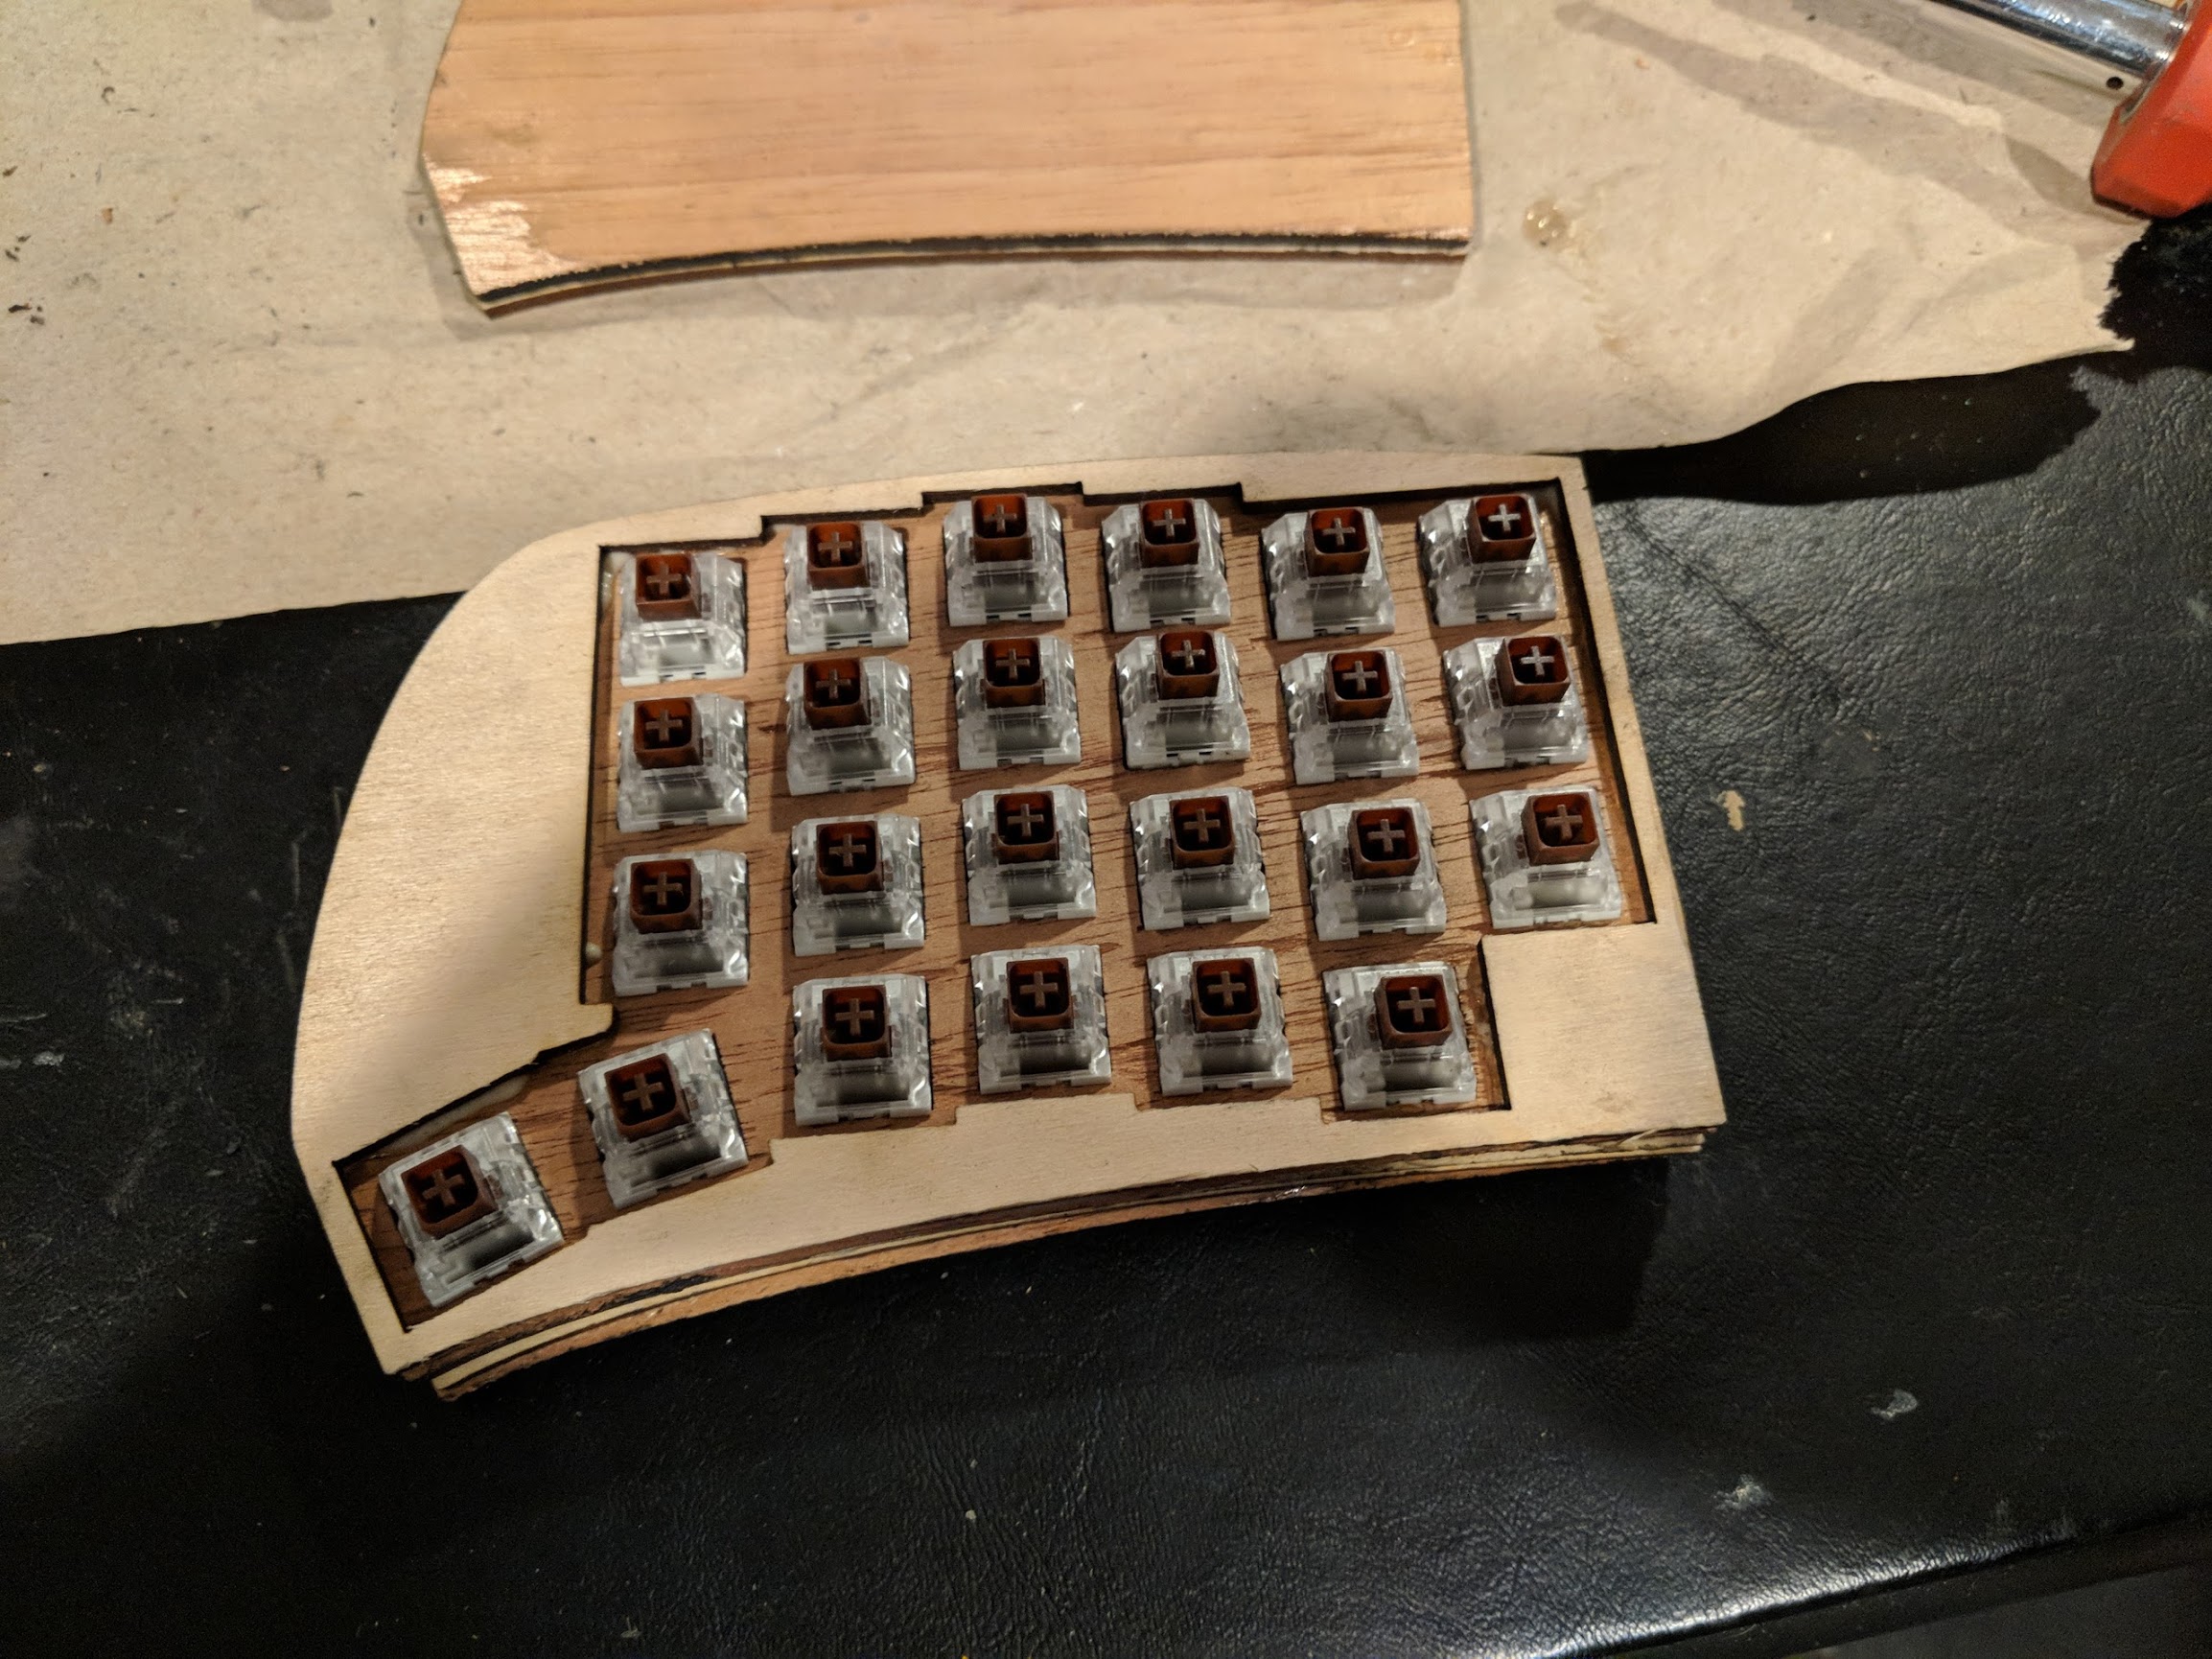 Right half of split keyboard with Kailh Brown Box switches in it